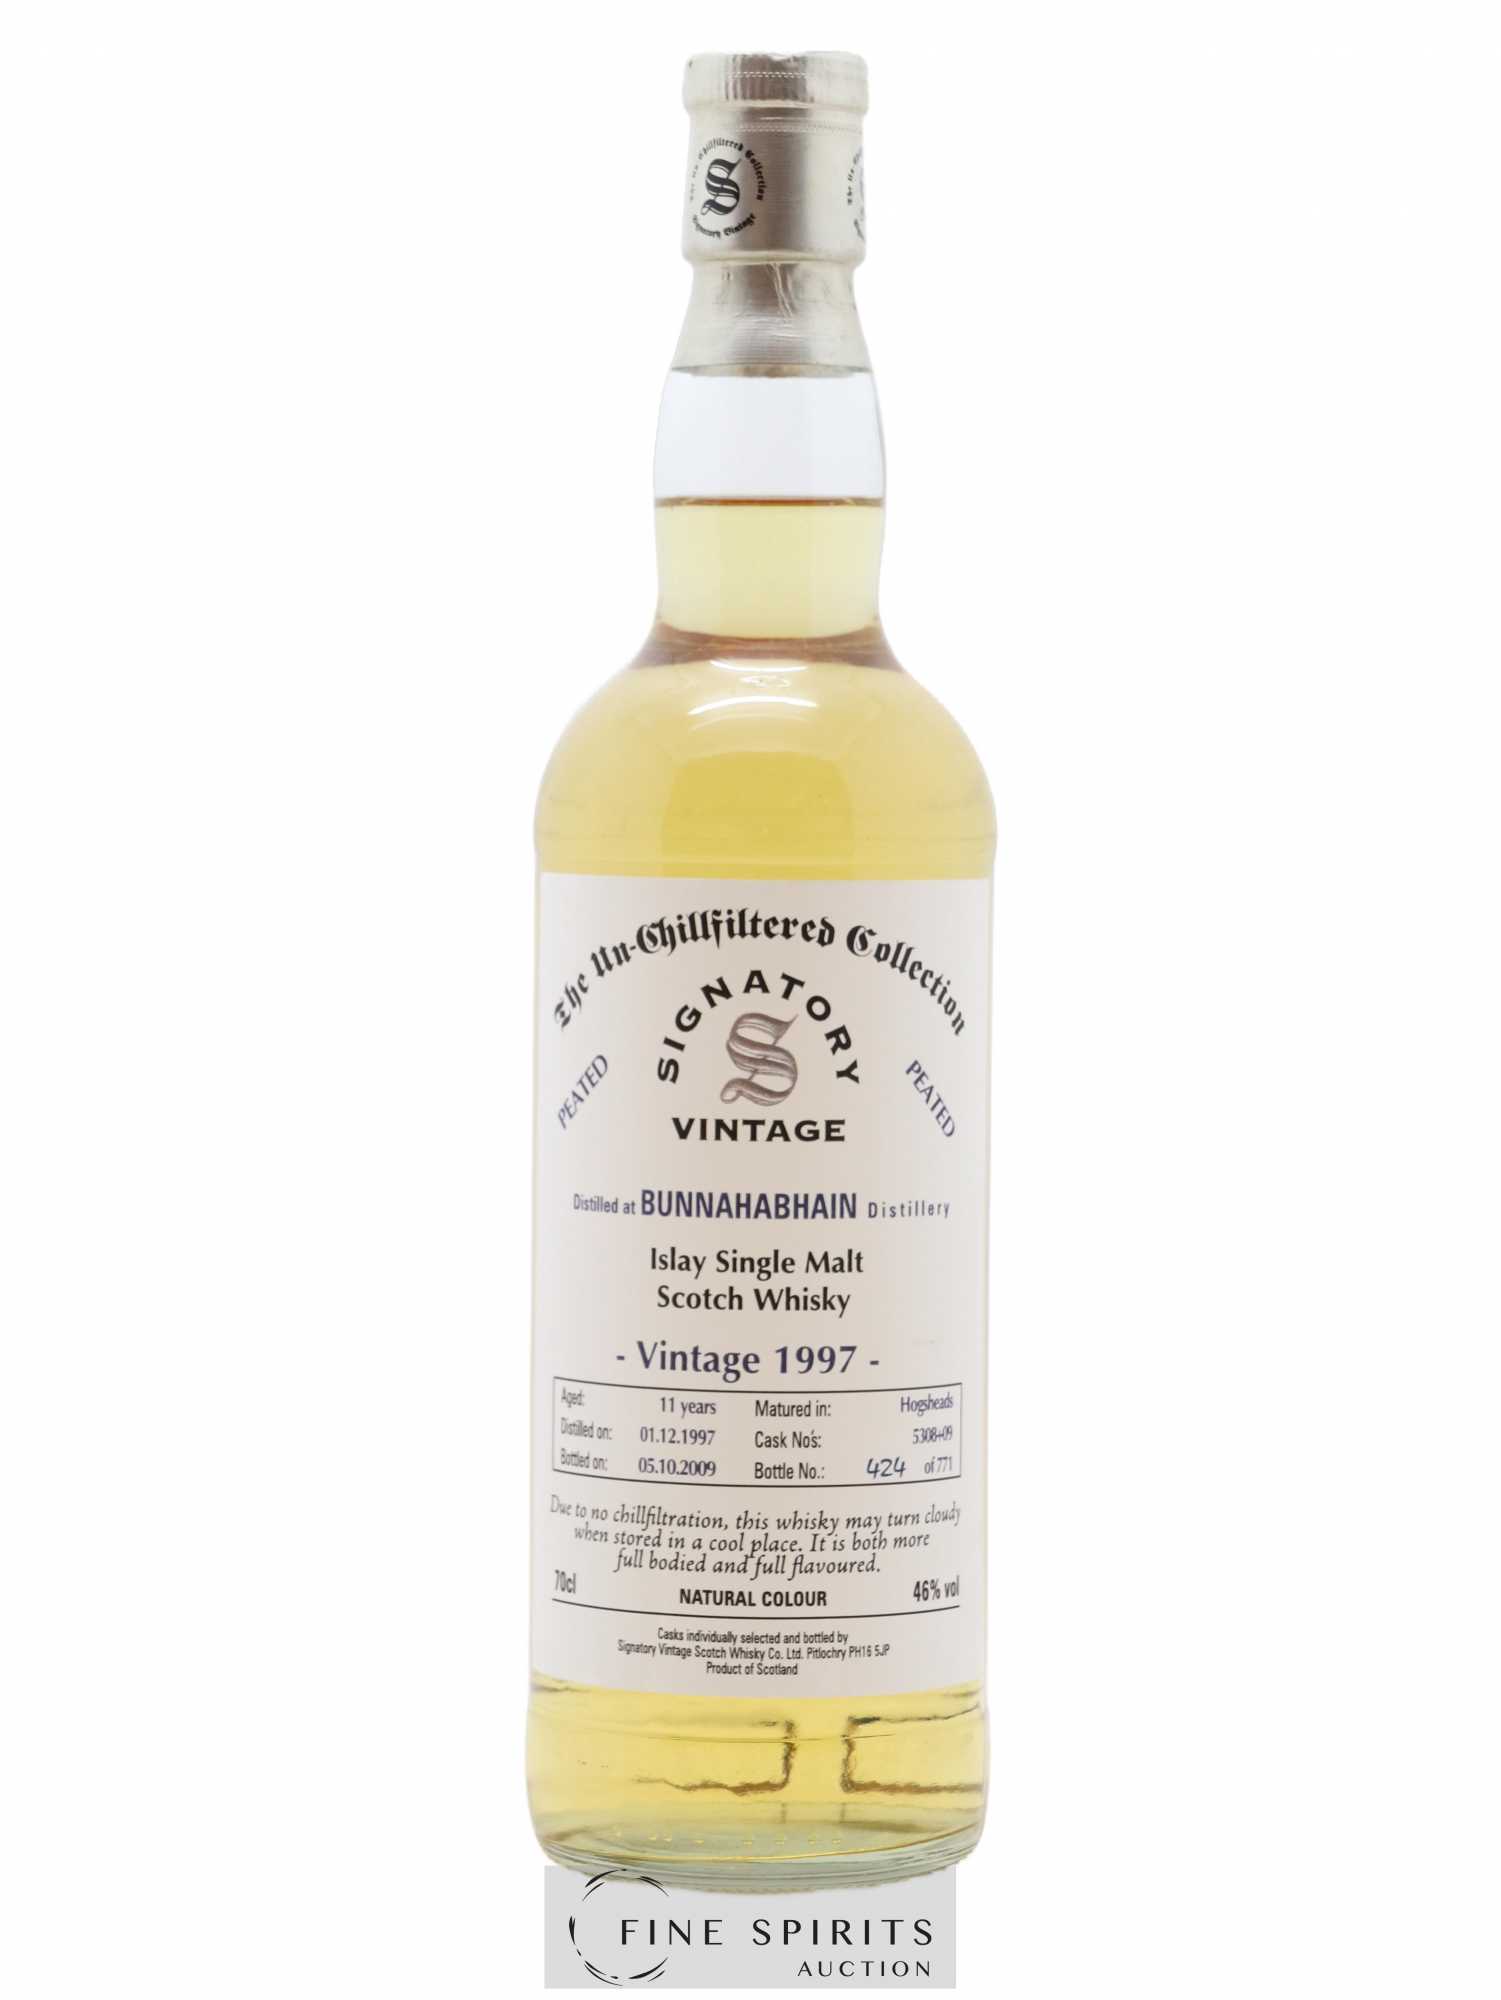 Bunnahabhain 11 years 1997 Signatory Vintage Hogsheads Casks n°5308-5309 - One of 771 - bottled 2009 The Un-Chillfiltered Collection